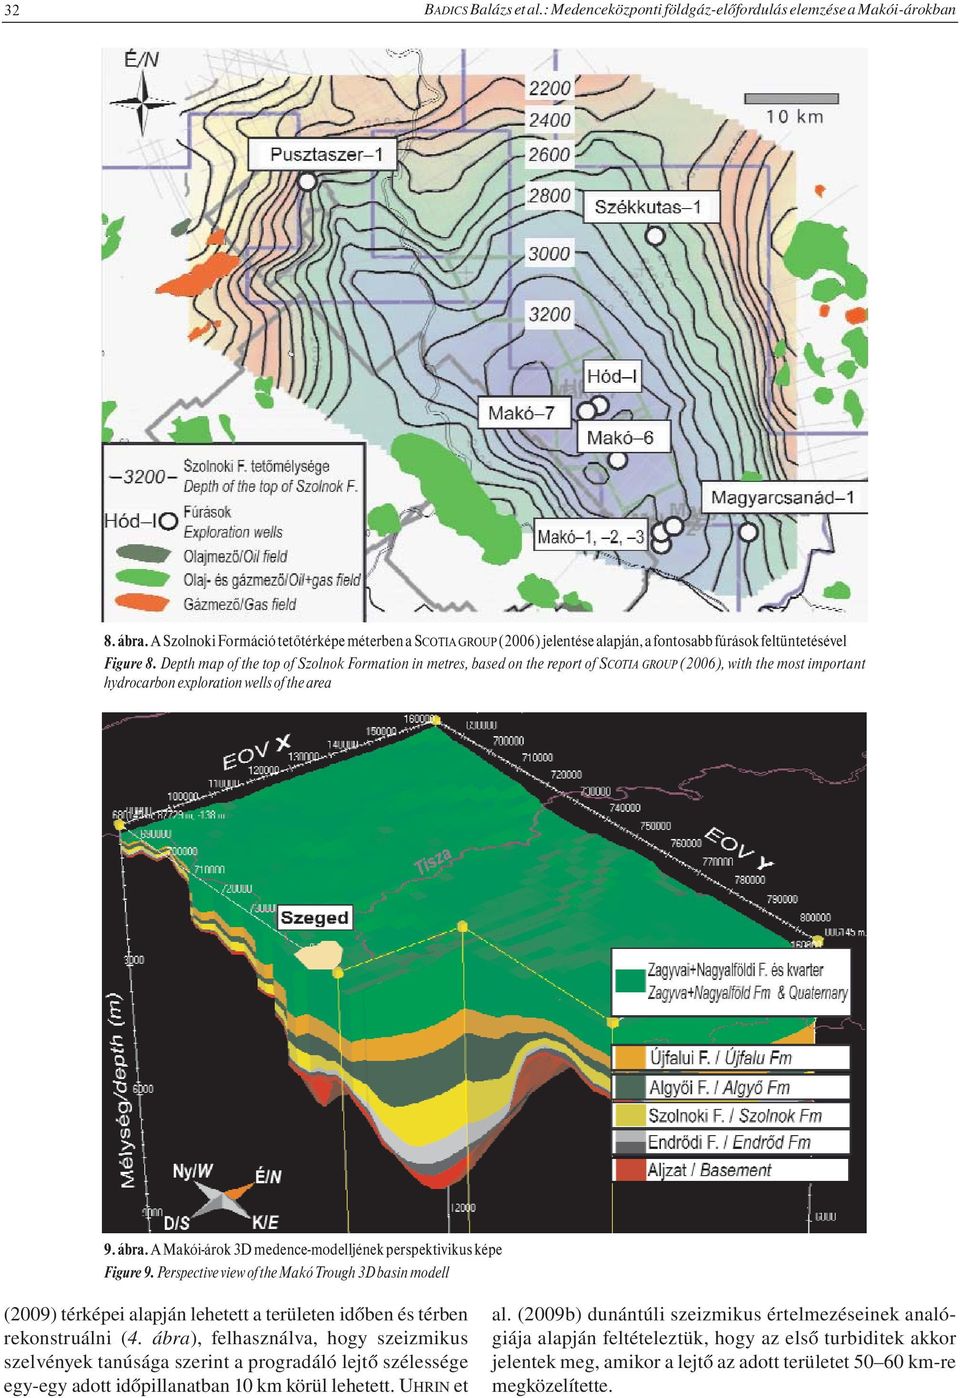 Depth map of the top of Szolnok Formation in metres, based on the report of SCOTIA GROUP (2006), with the most important hydrocarbon exploration wells of the area 9. ábra.